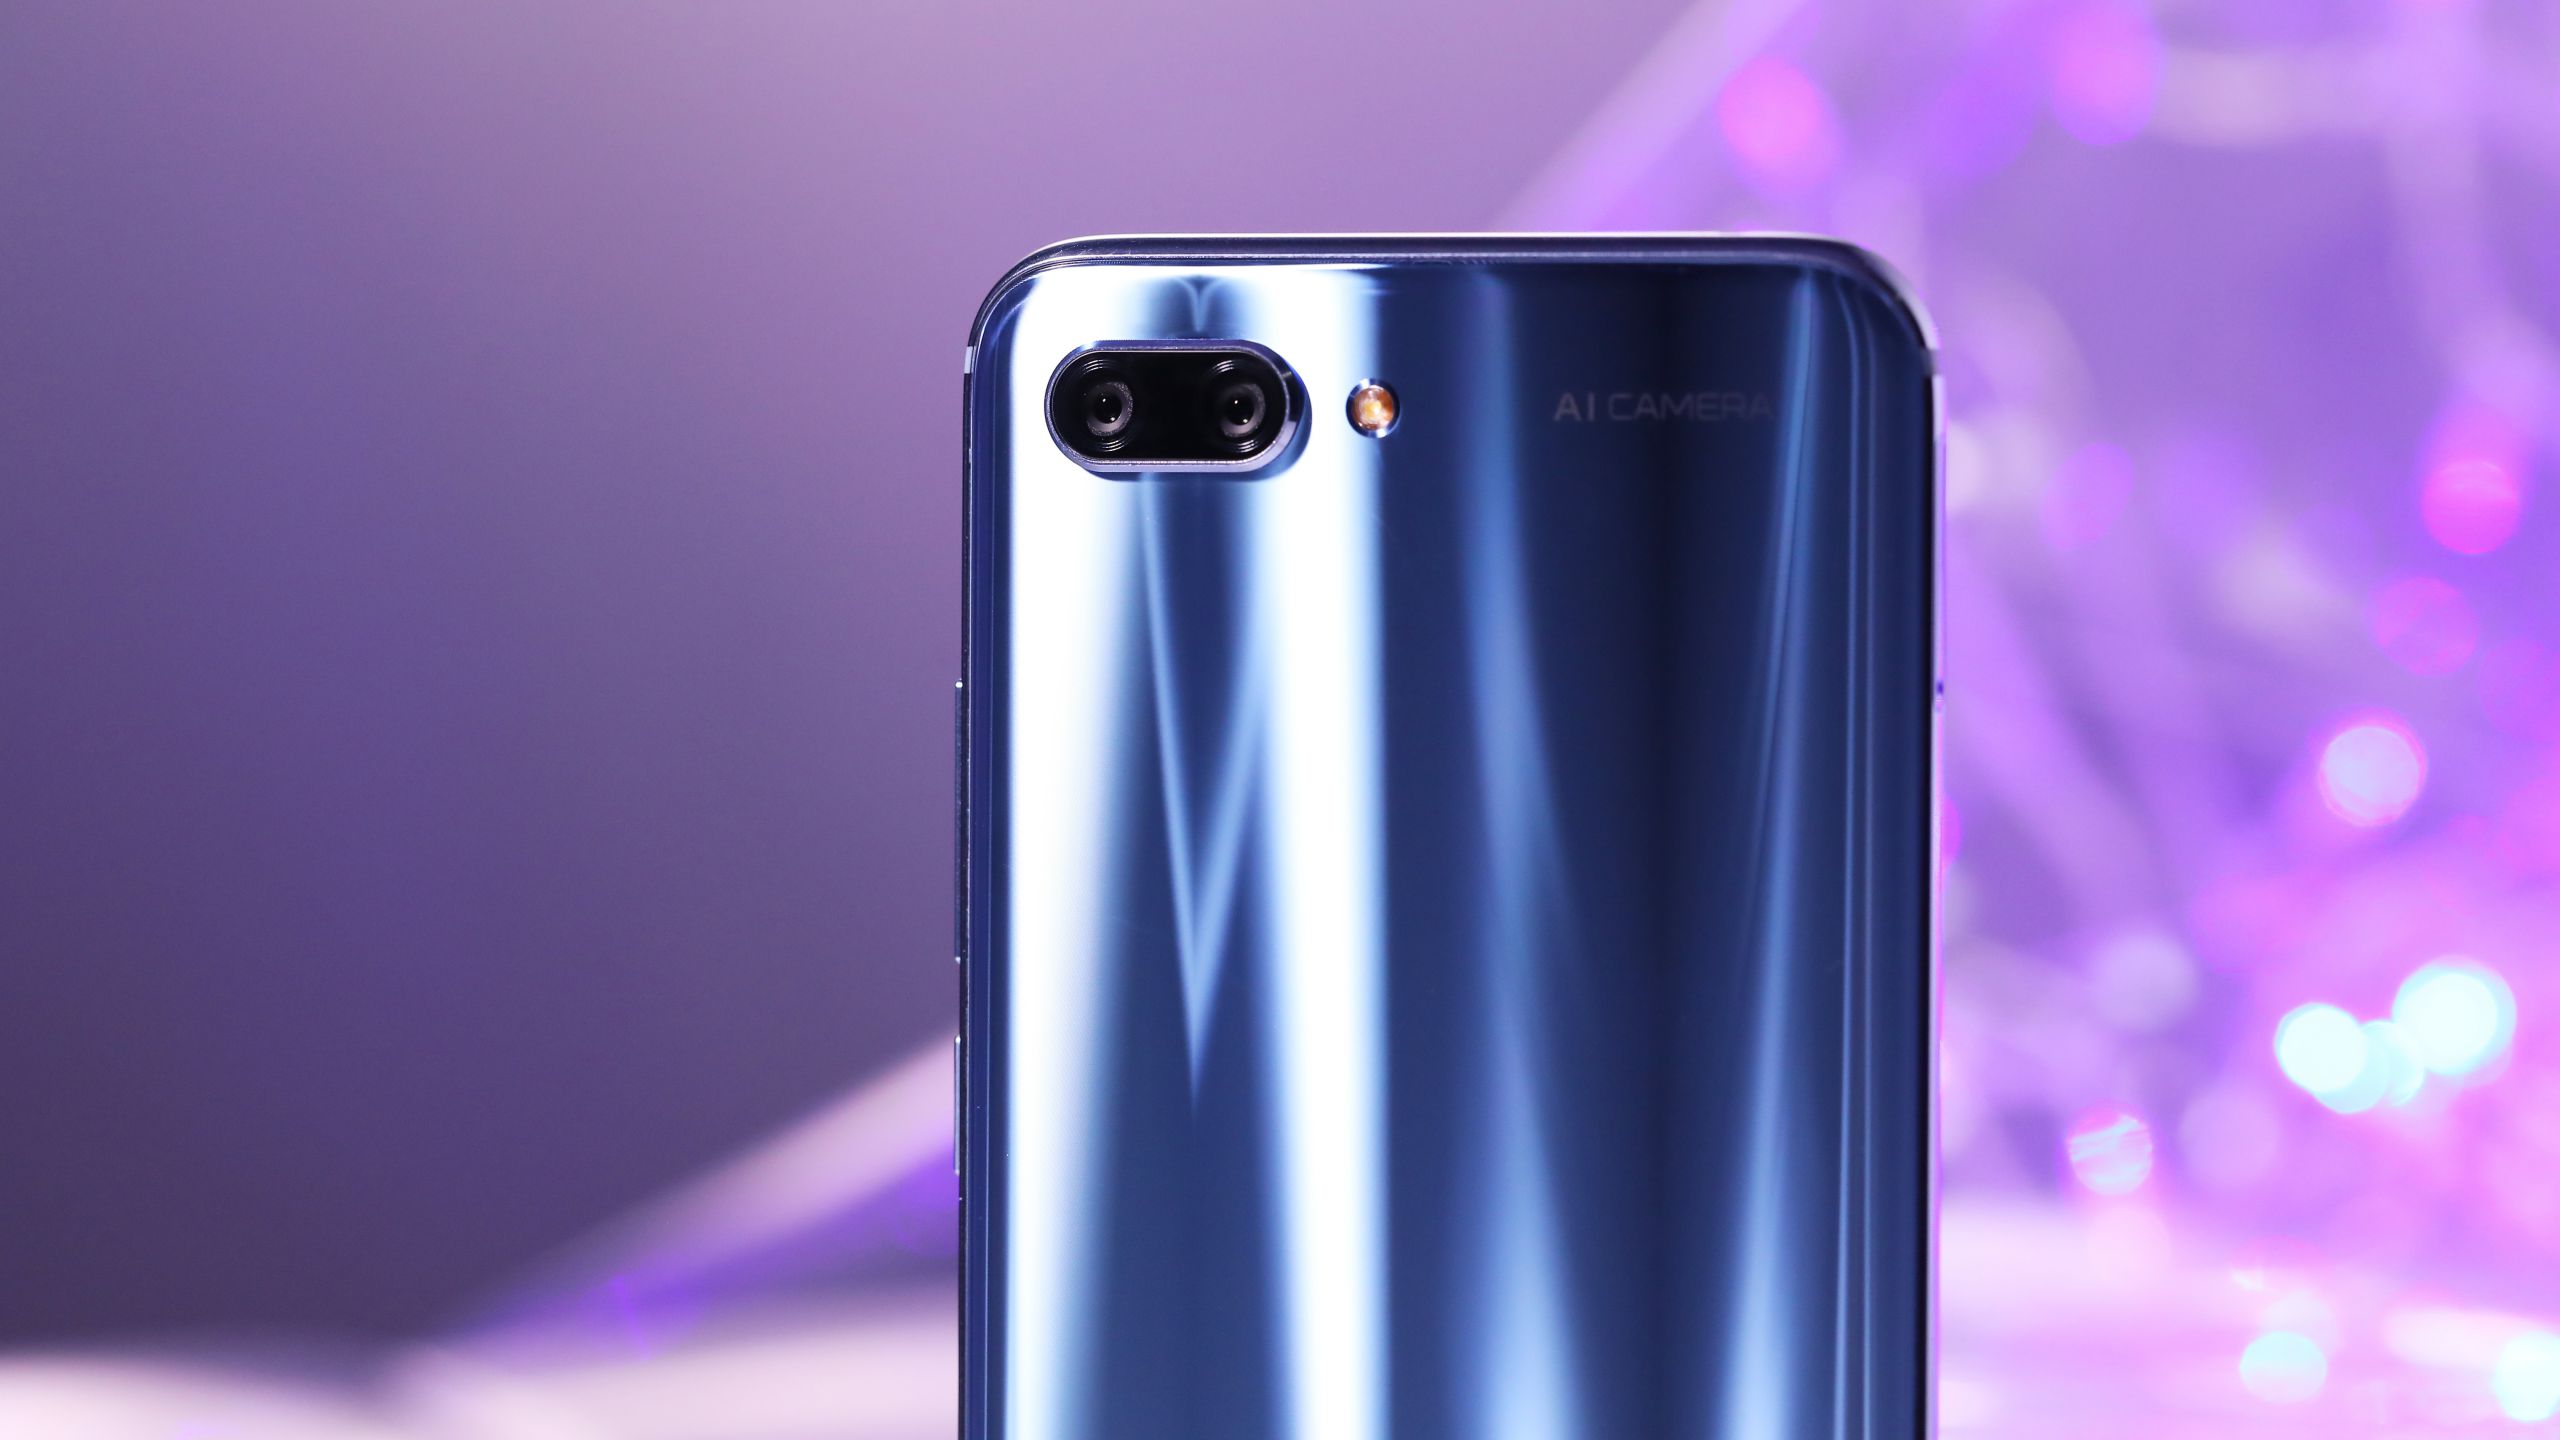 Smartphone Honor 10i - European version of the popular flagship Honor 10